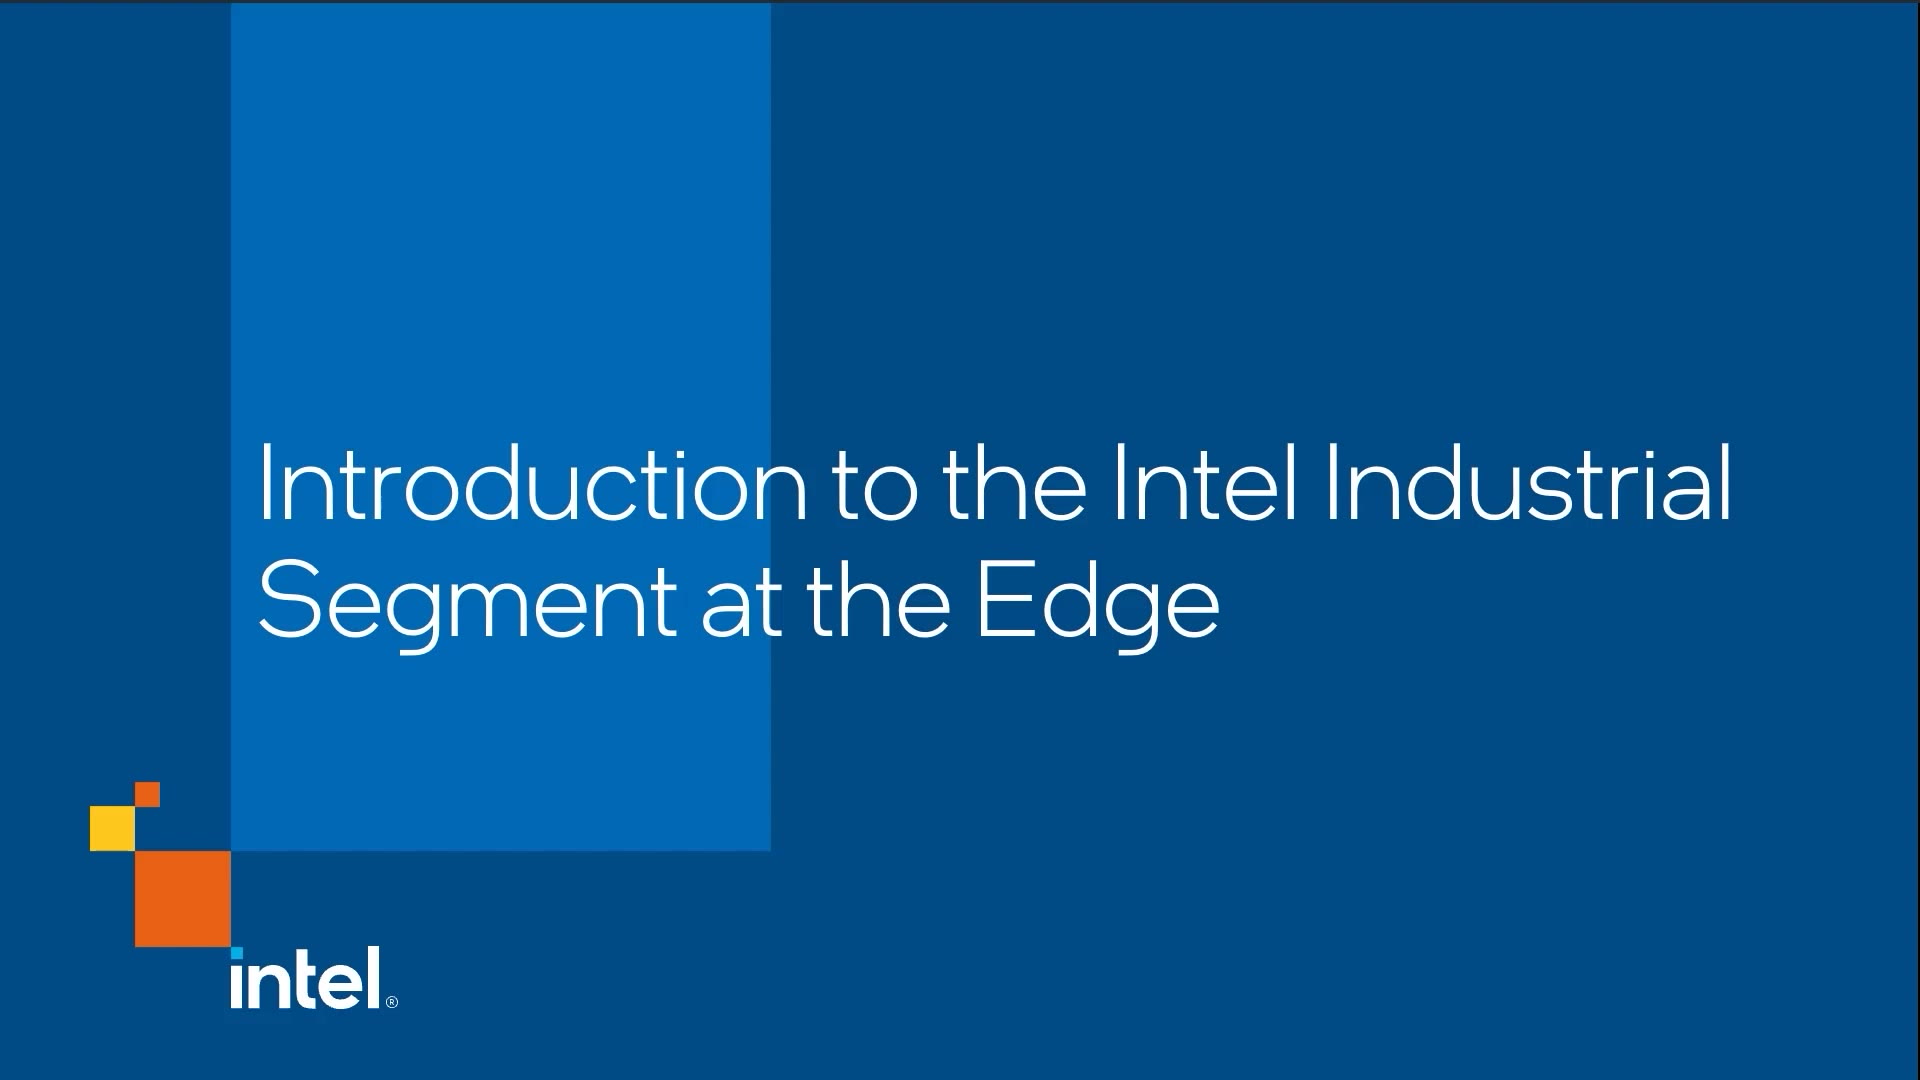 Chapter 1: Introduction to the Intel Industrial Segment at the Edge